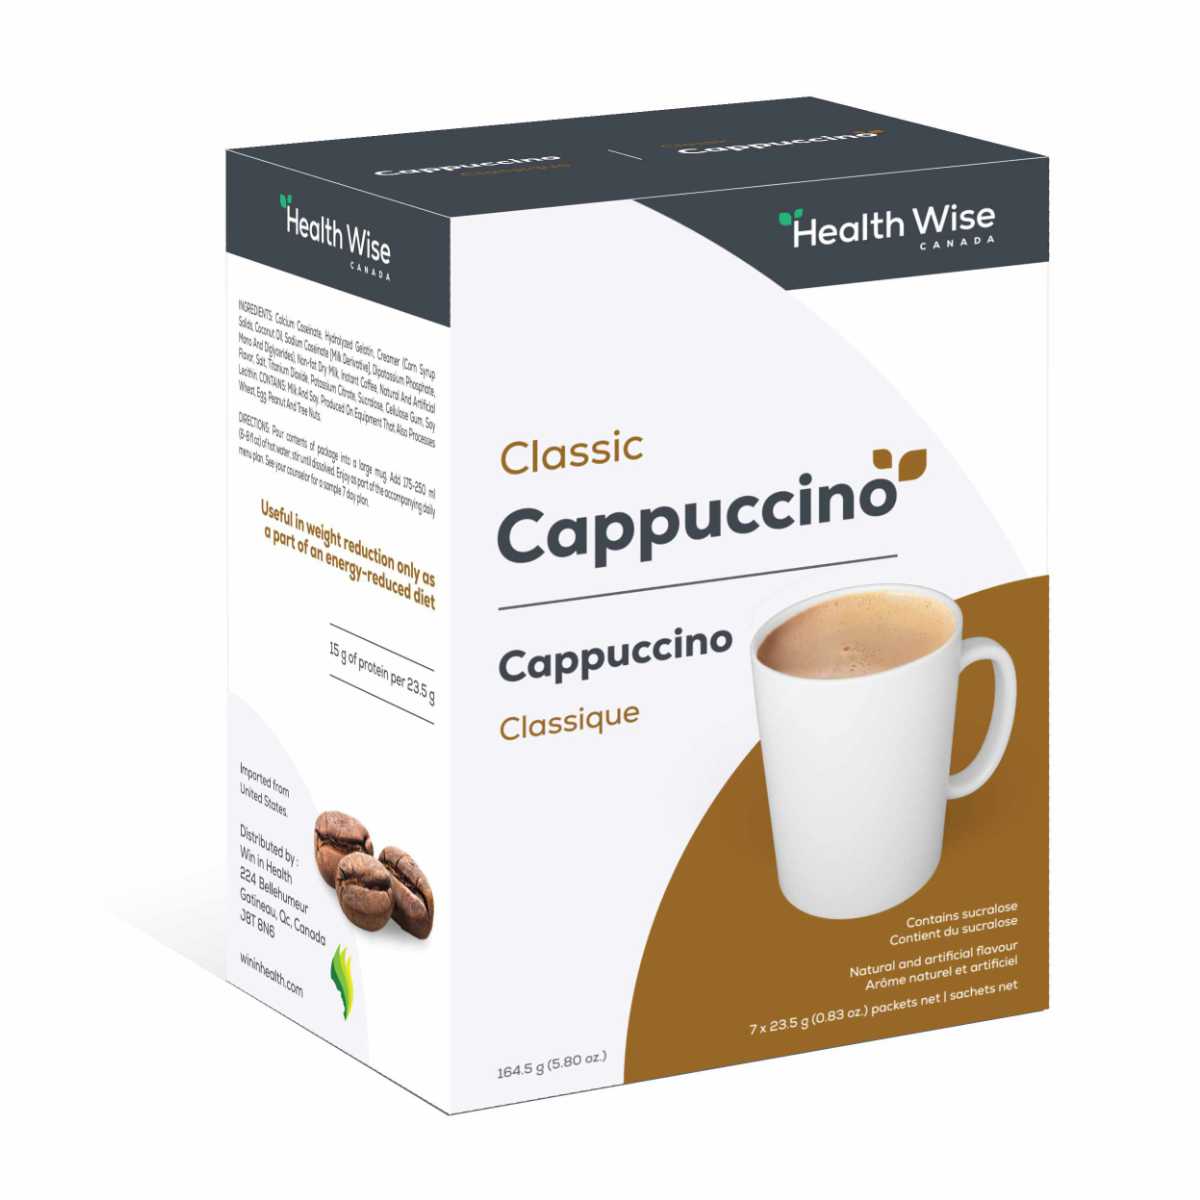 Health wise - protein drink -  classic cappuccino